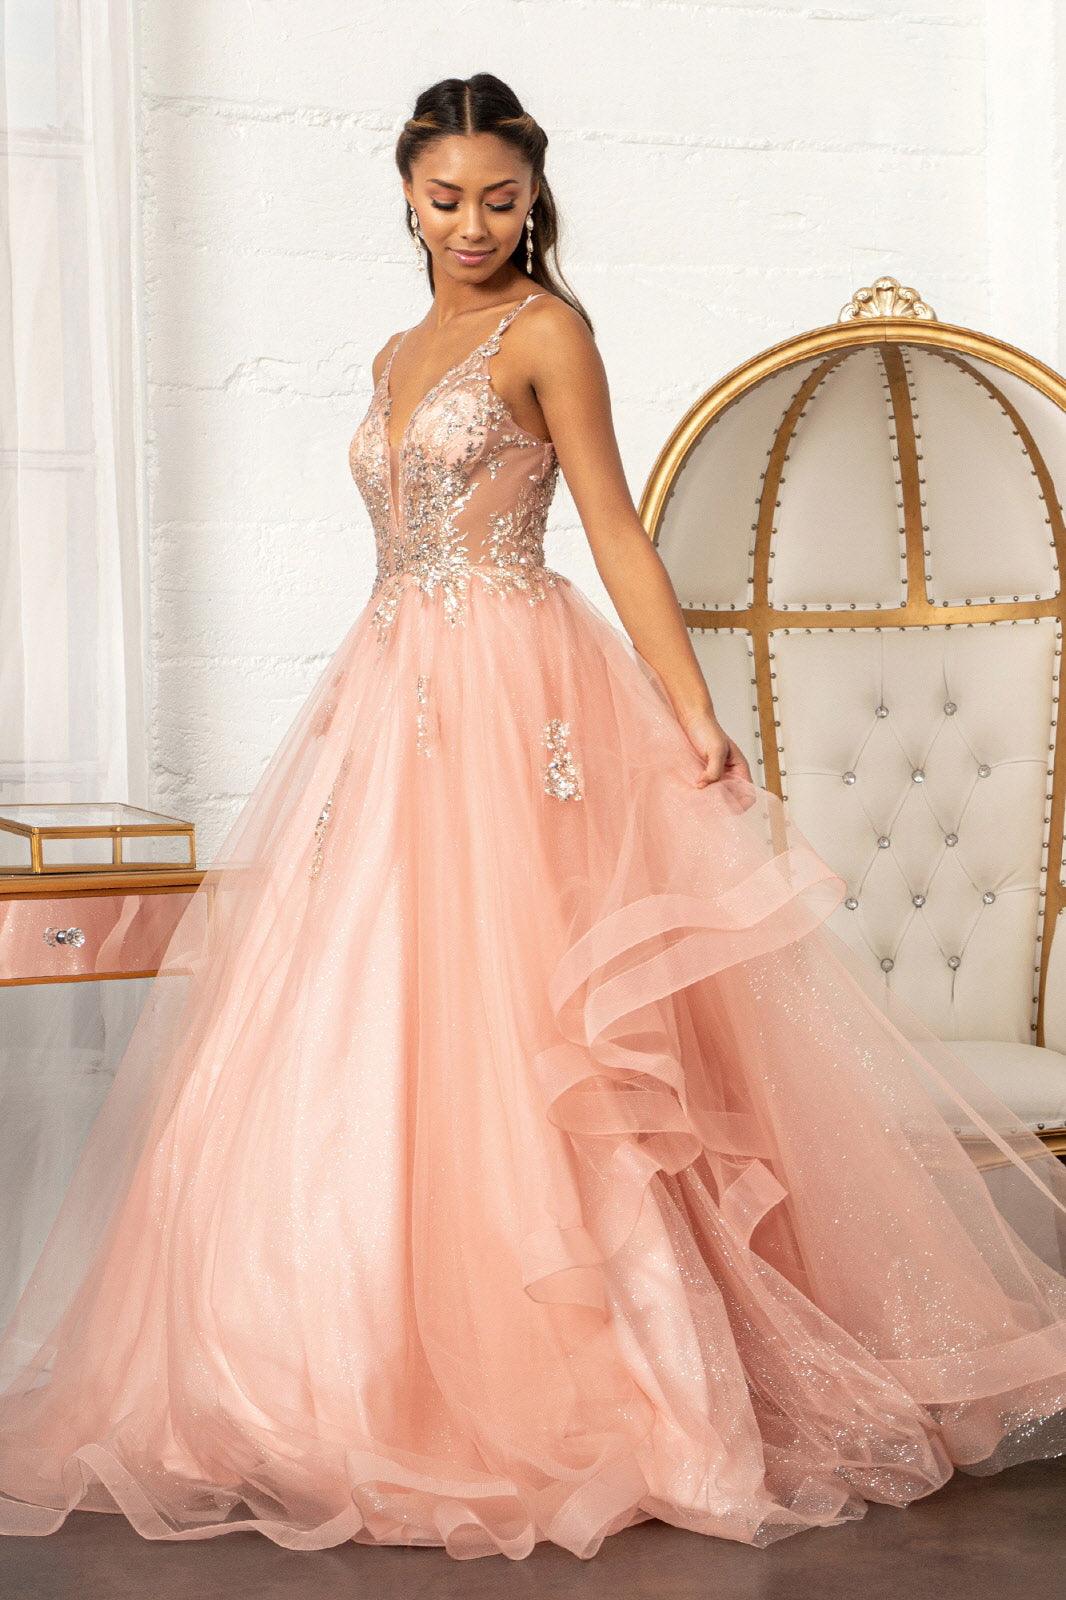 Tulle Sweetheart Ball Gown Wedding Dresses Floral Flowers | Blush pink  wedding dress, Ball gowns, Pink prom dresses